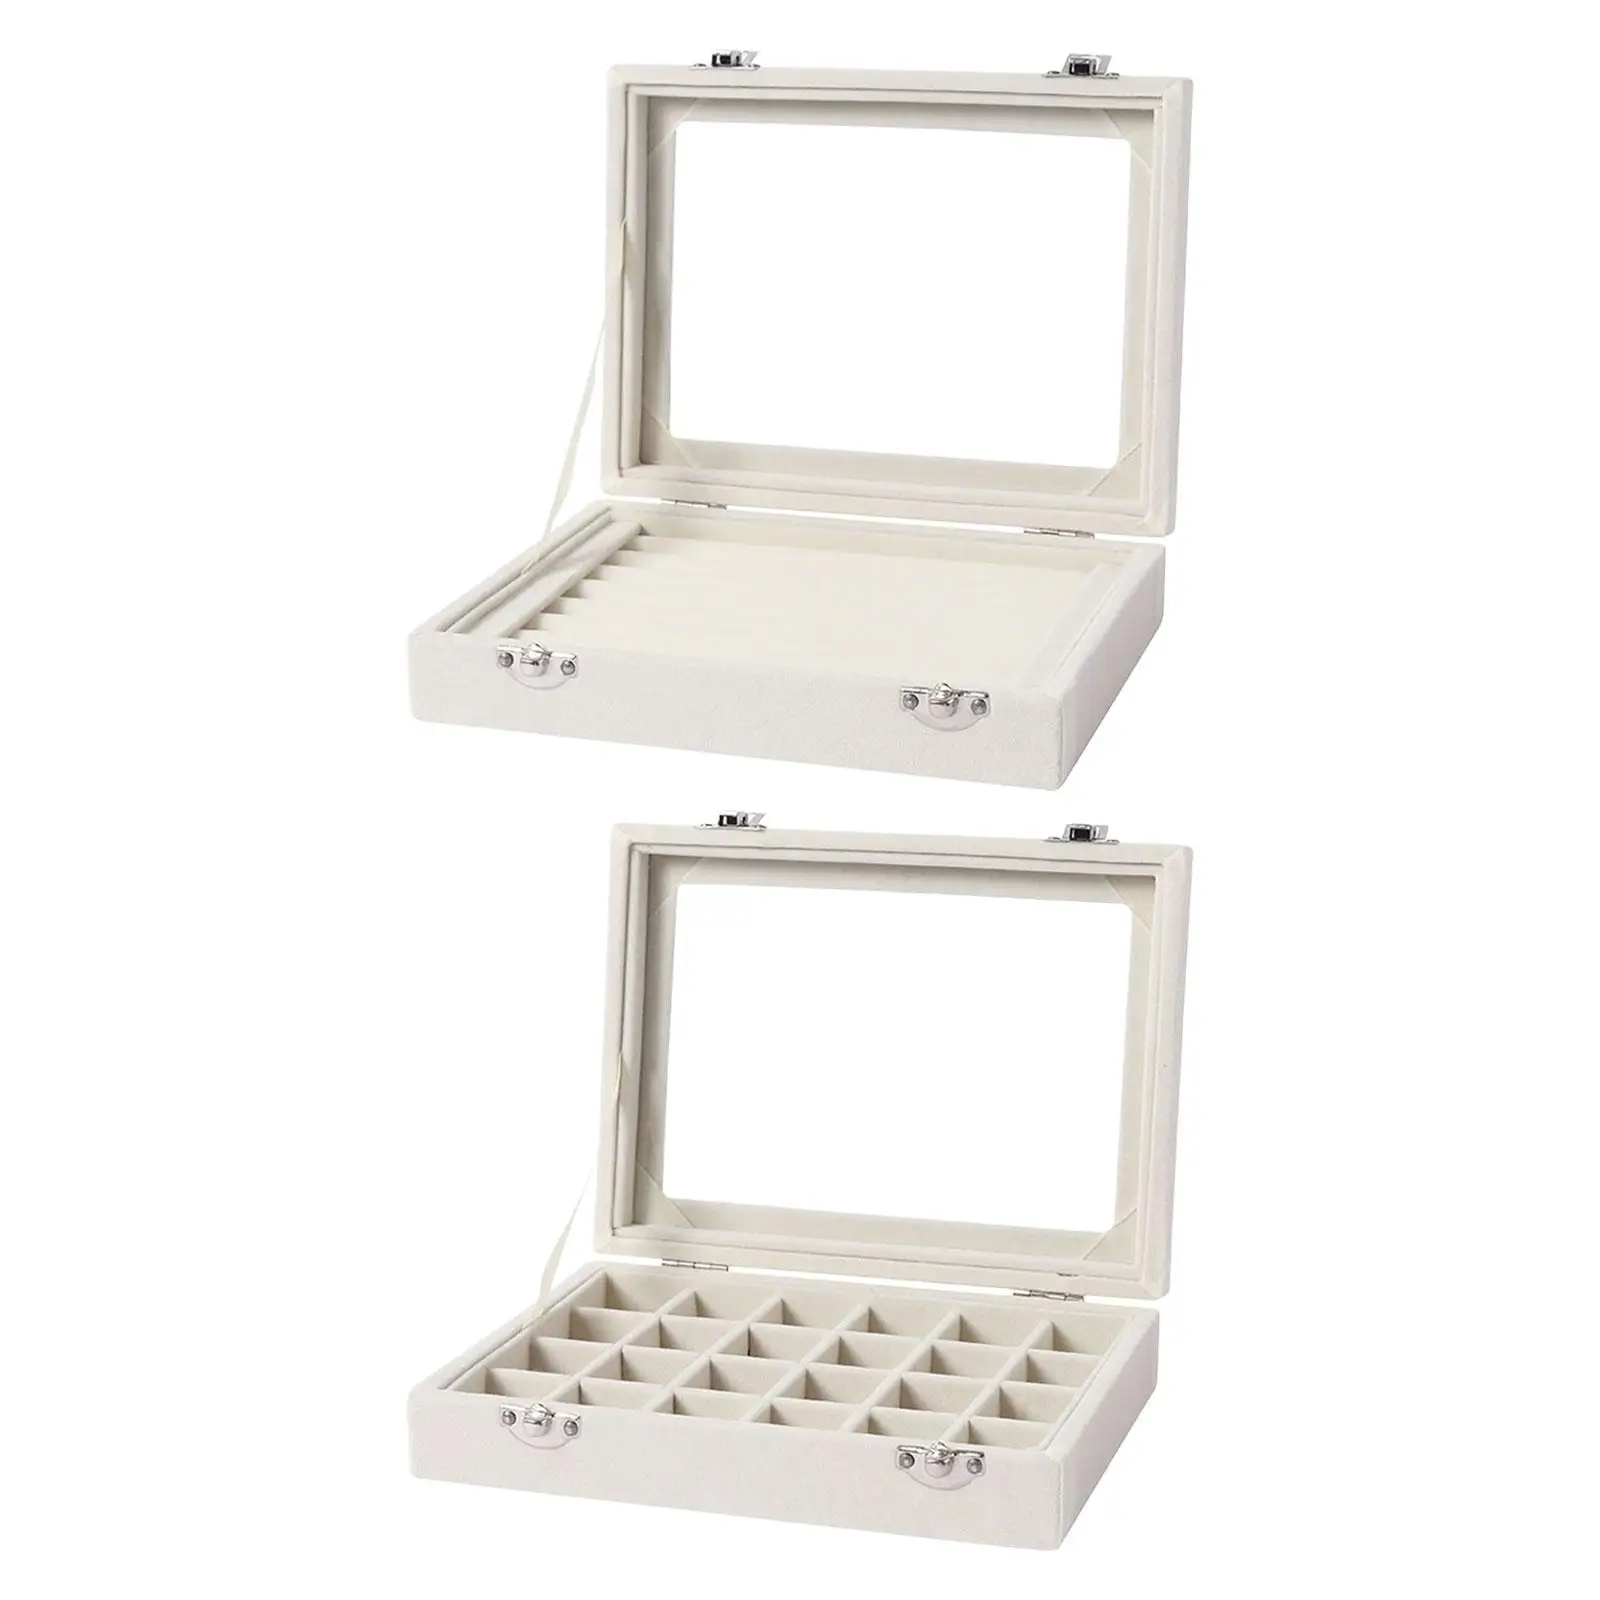 Earring Organizer Tray Jewelry Holder Store with Glass Cover Necklace Bracelet Container Jewelry Box for Display Storage Jewelry